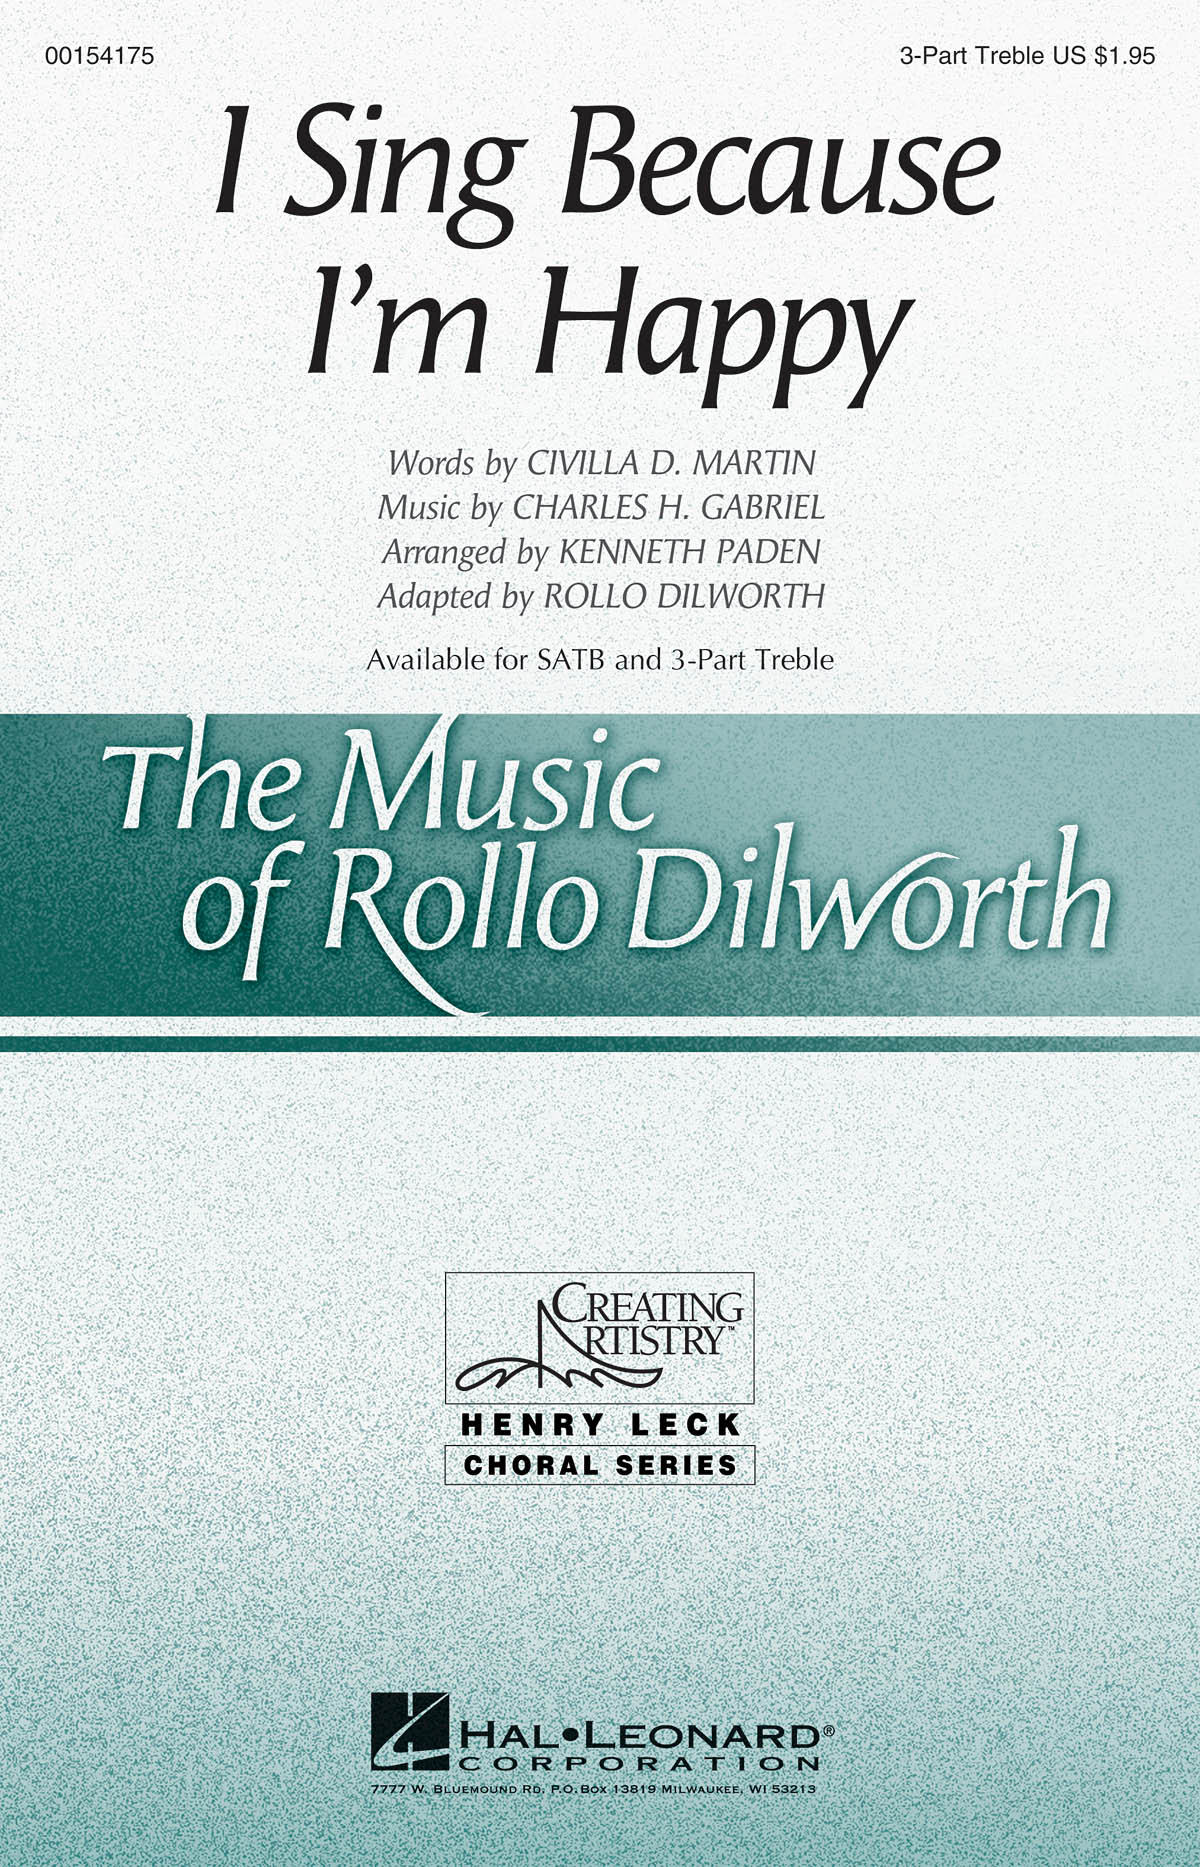 I Sing Because I'm Happy: Upper Voices a Cappella: Vocal Score